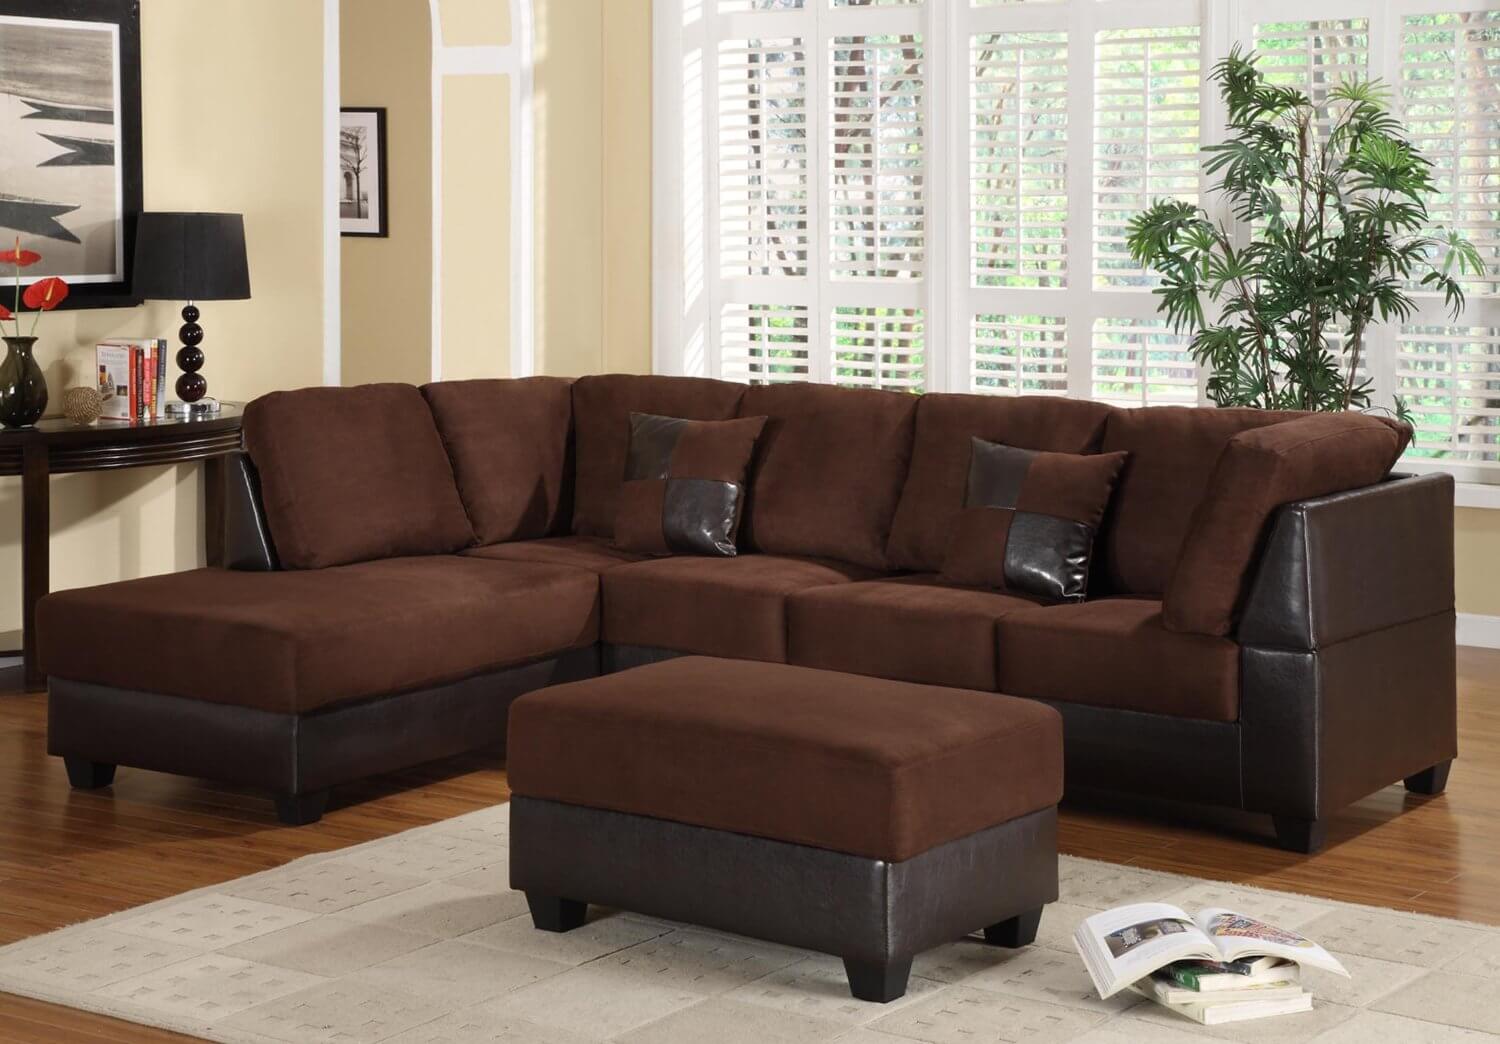 40 Cheap Sectional Sofas Under $500